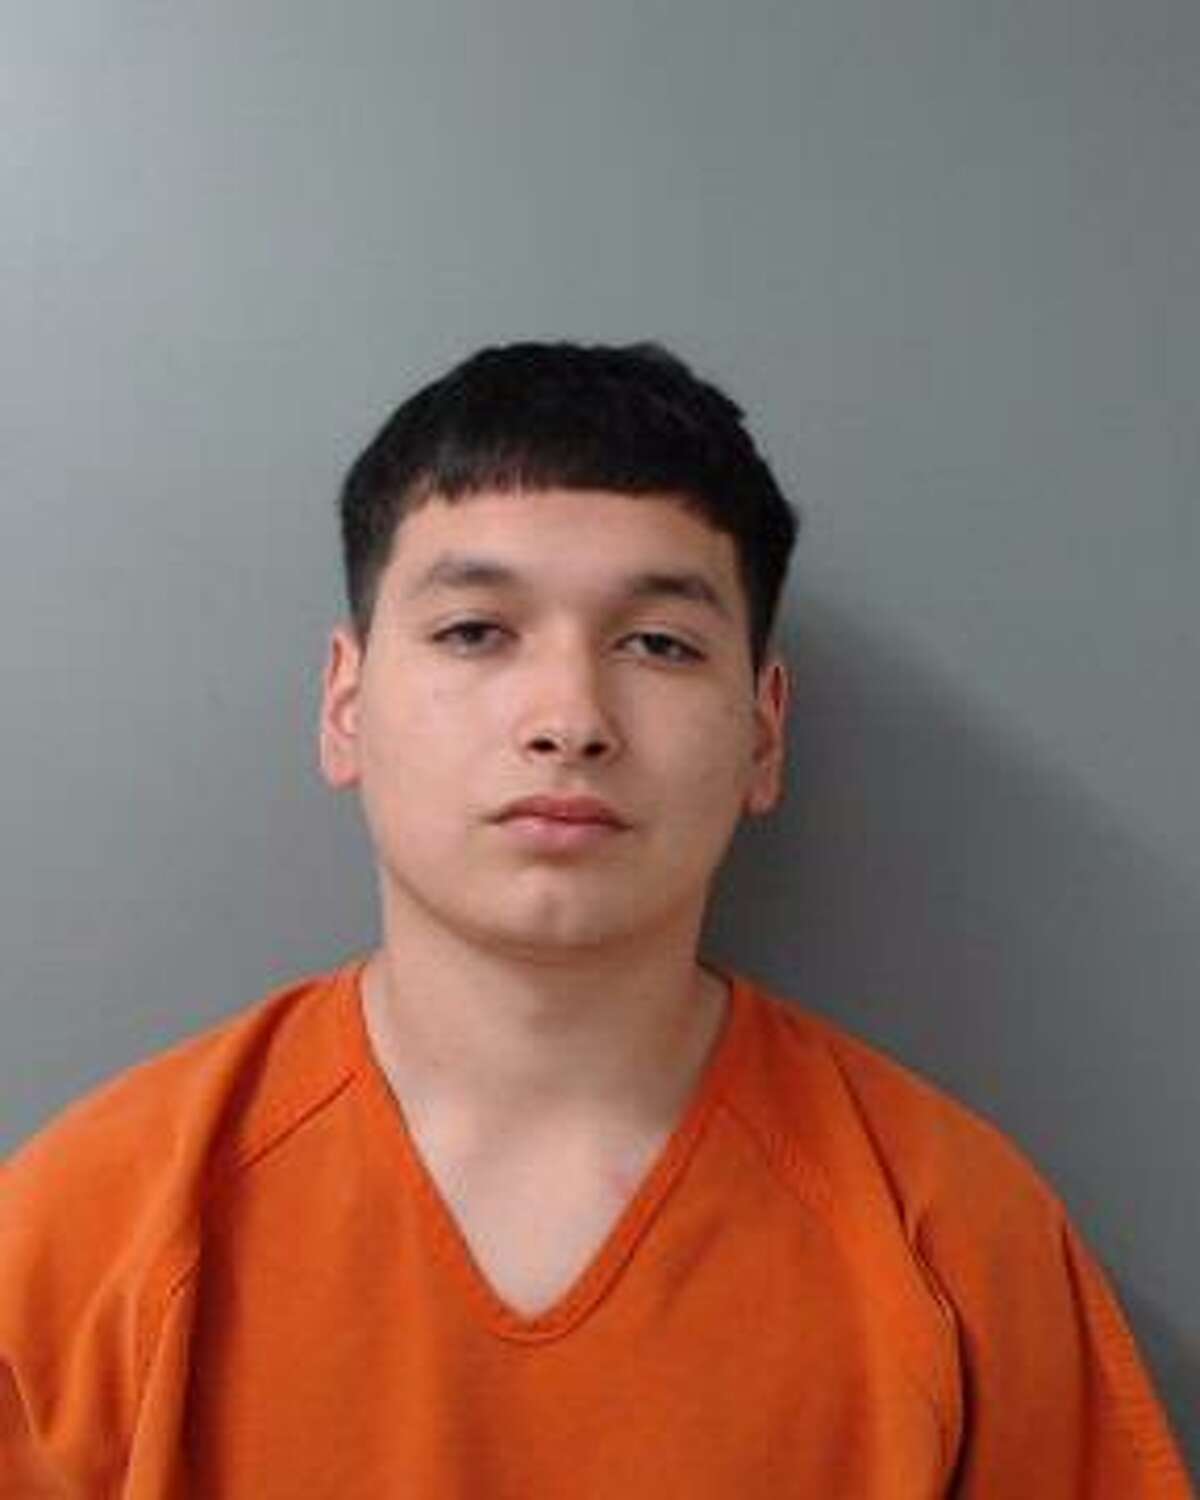 Pete Guevara, 19, was arrested and charged with possession of a controlled substance in a drug-free zone.